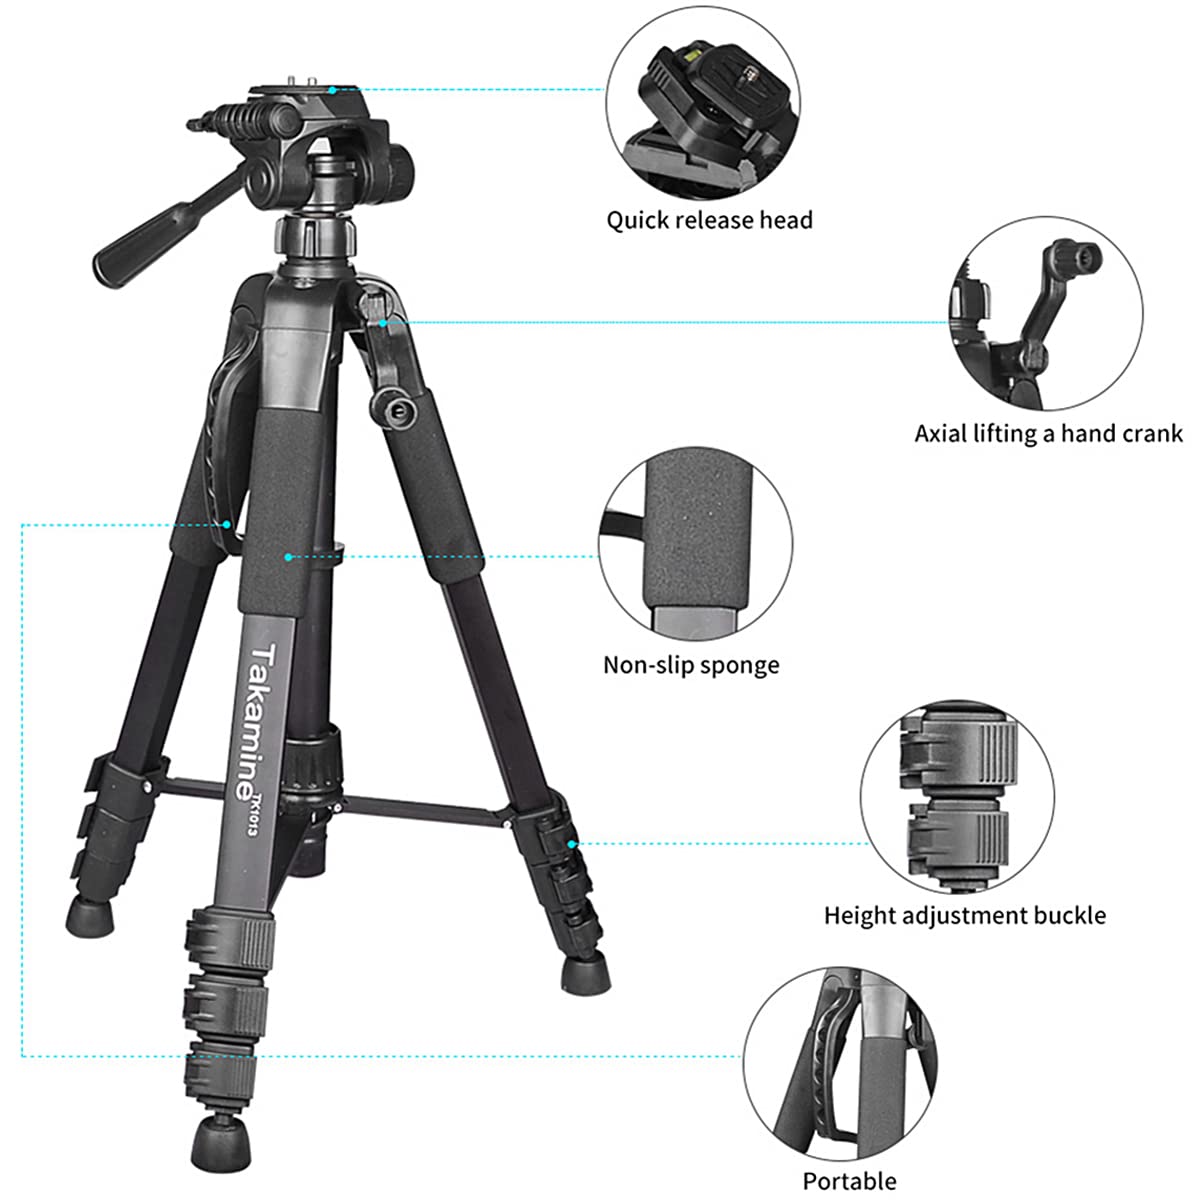 Takamine 63" Lightweight Adjustable Laser Level Aluminum Tripod with Portable Handle, Bubble Level, Quick Release Plate with 1/4" Screw Mount & 5/8" UNF Adapter Nut, 3-Way Swivel Pan Head